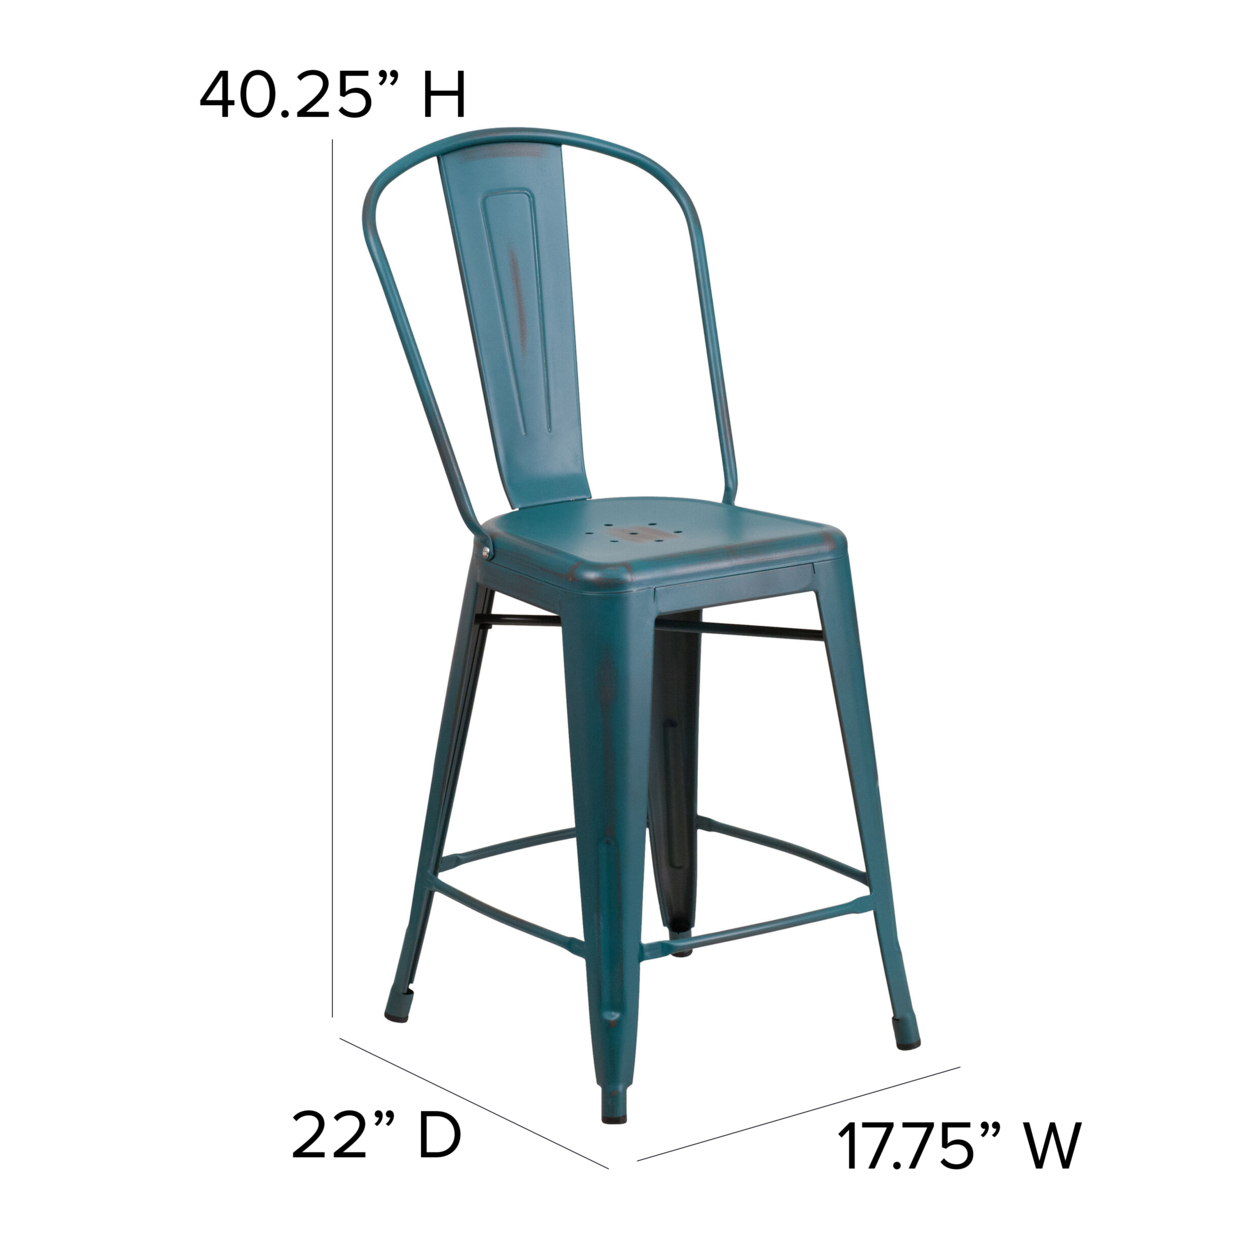 24 Inch Metal Counter Stool, Curved Open Back, Sleek Seat, Teal Blue